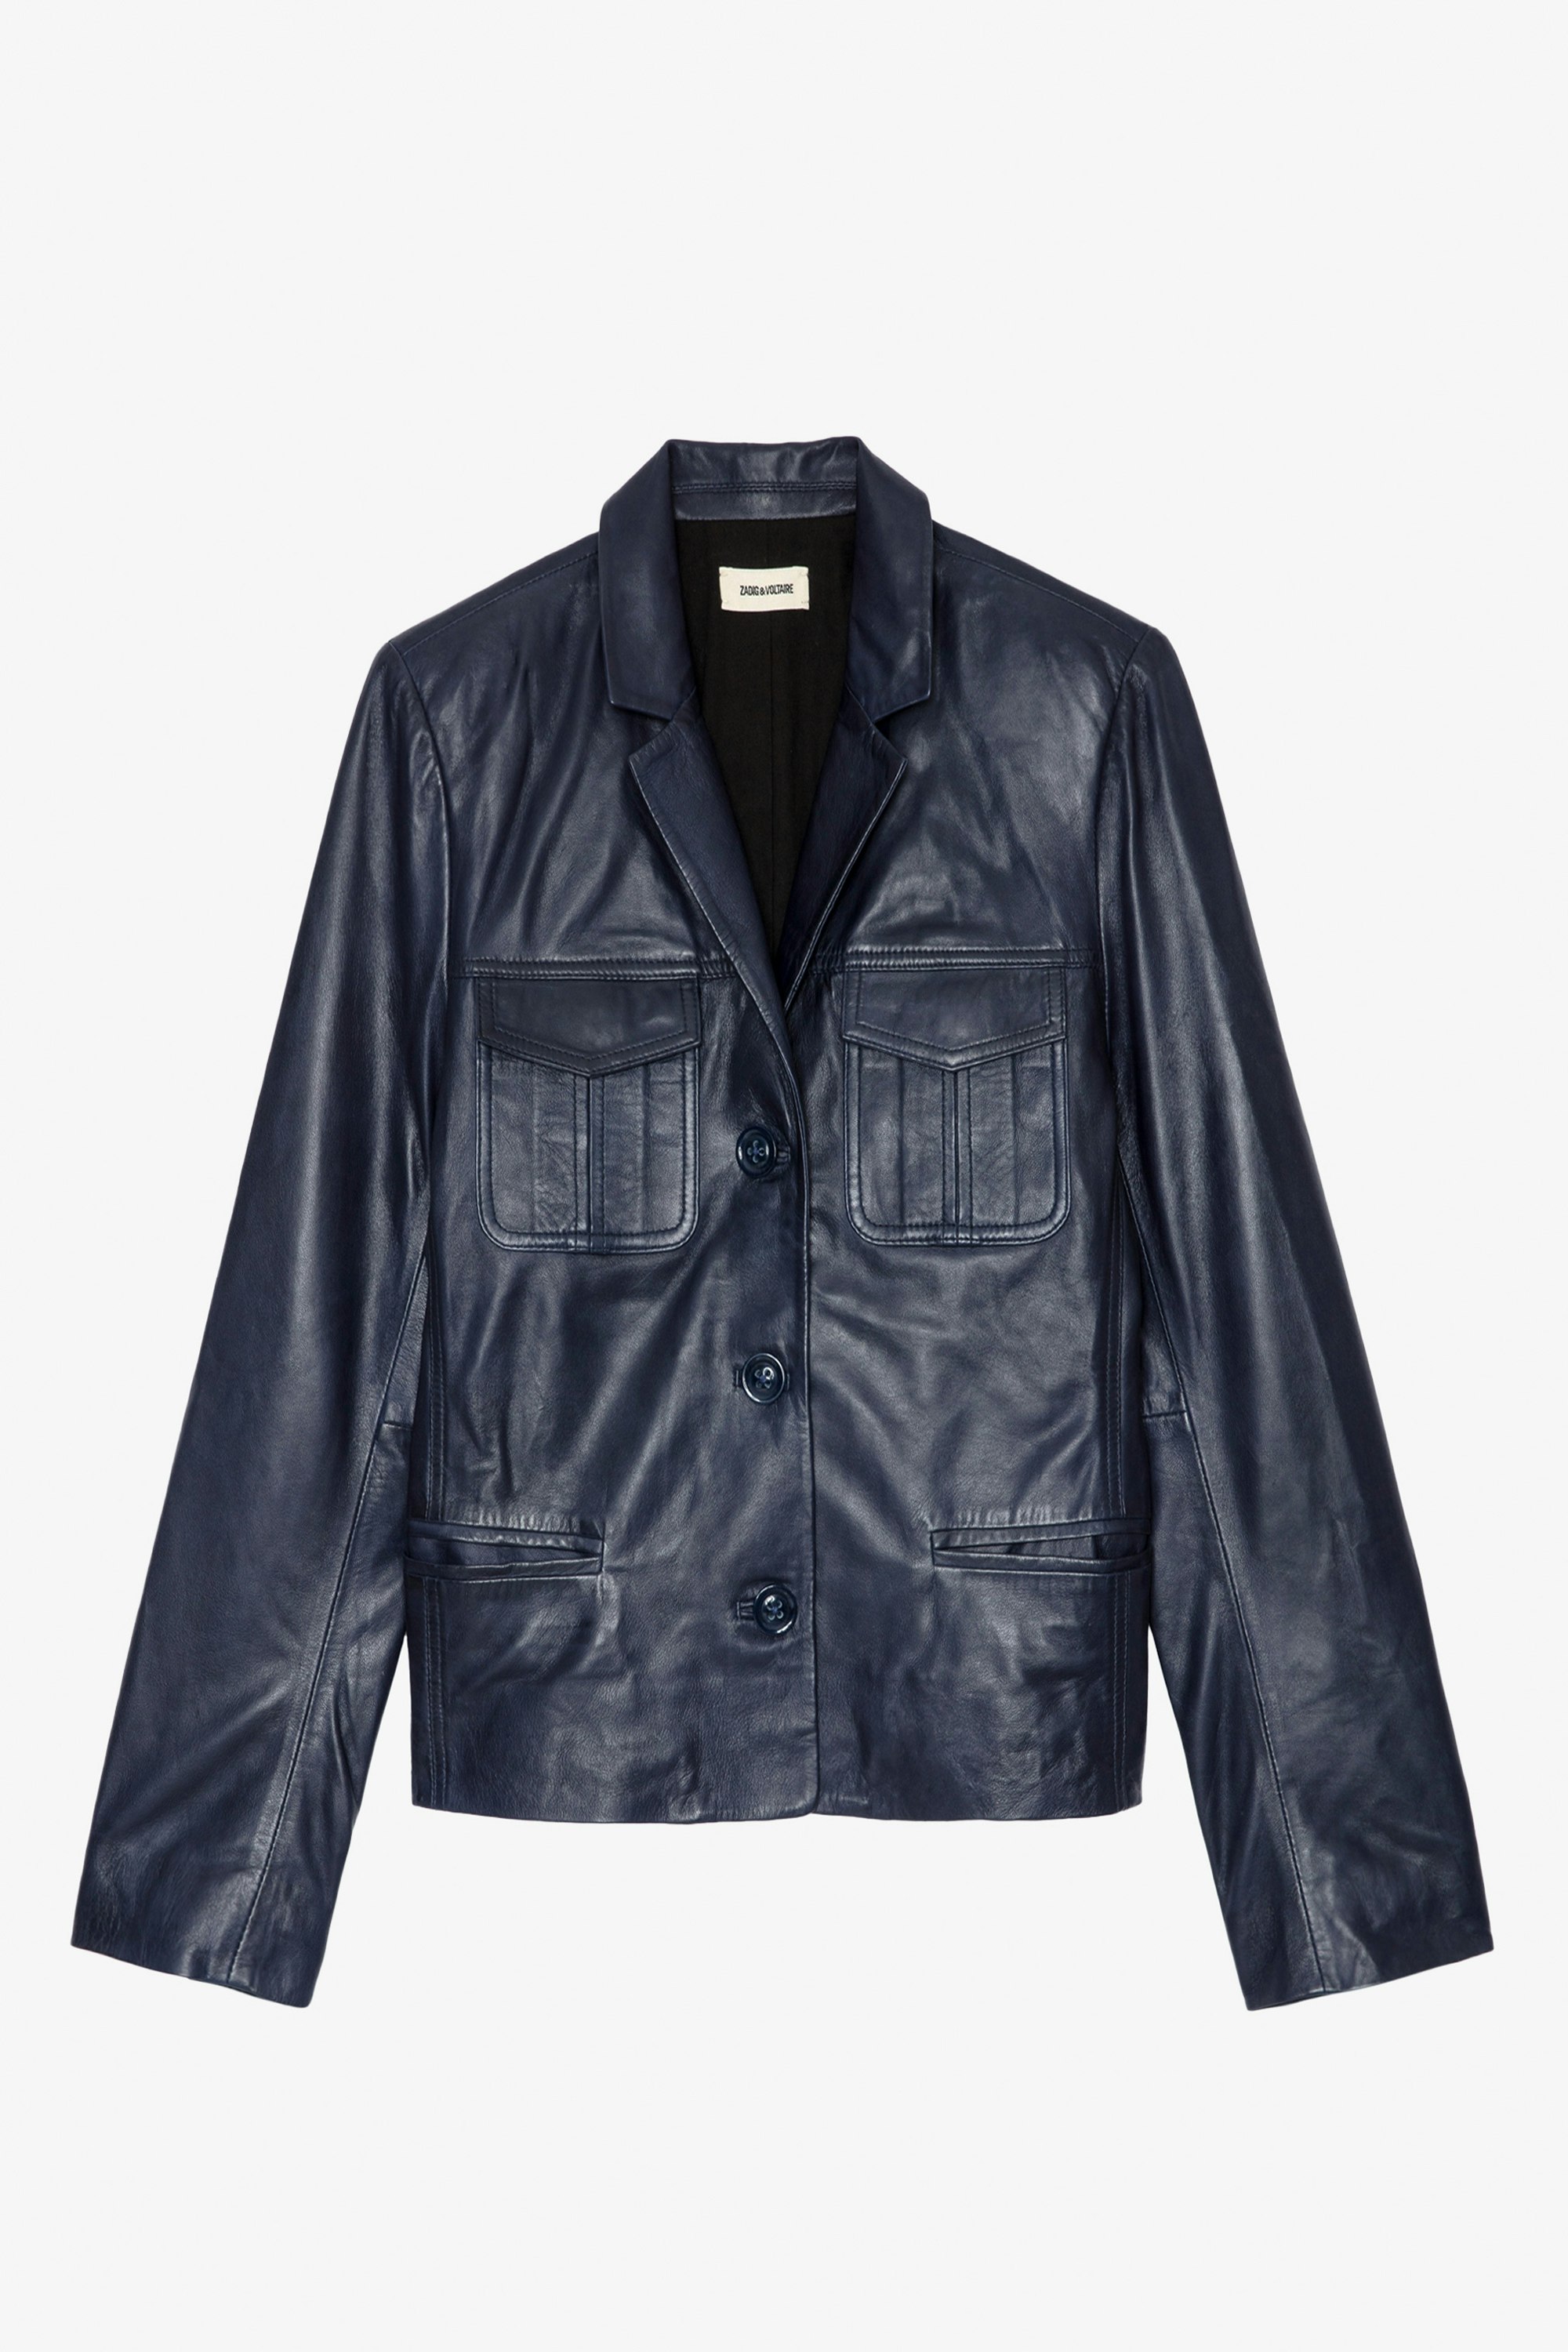 Liams Leather Jacket - Women’s navy blue smooth leather jacket.